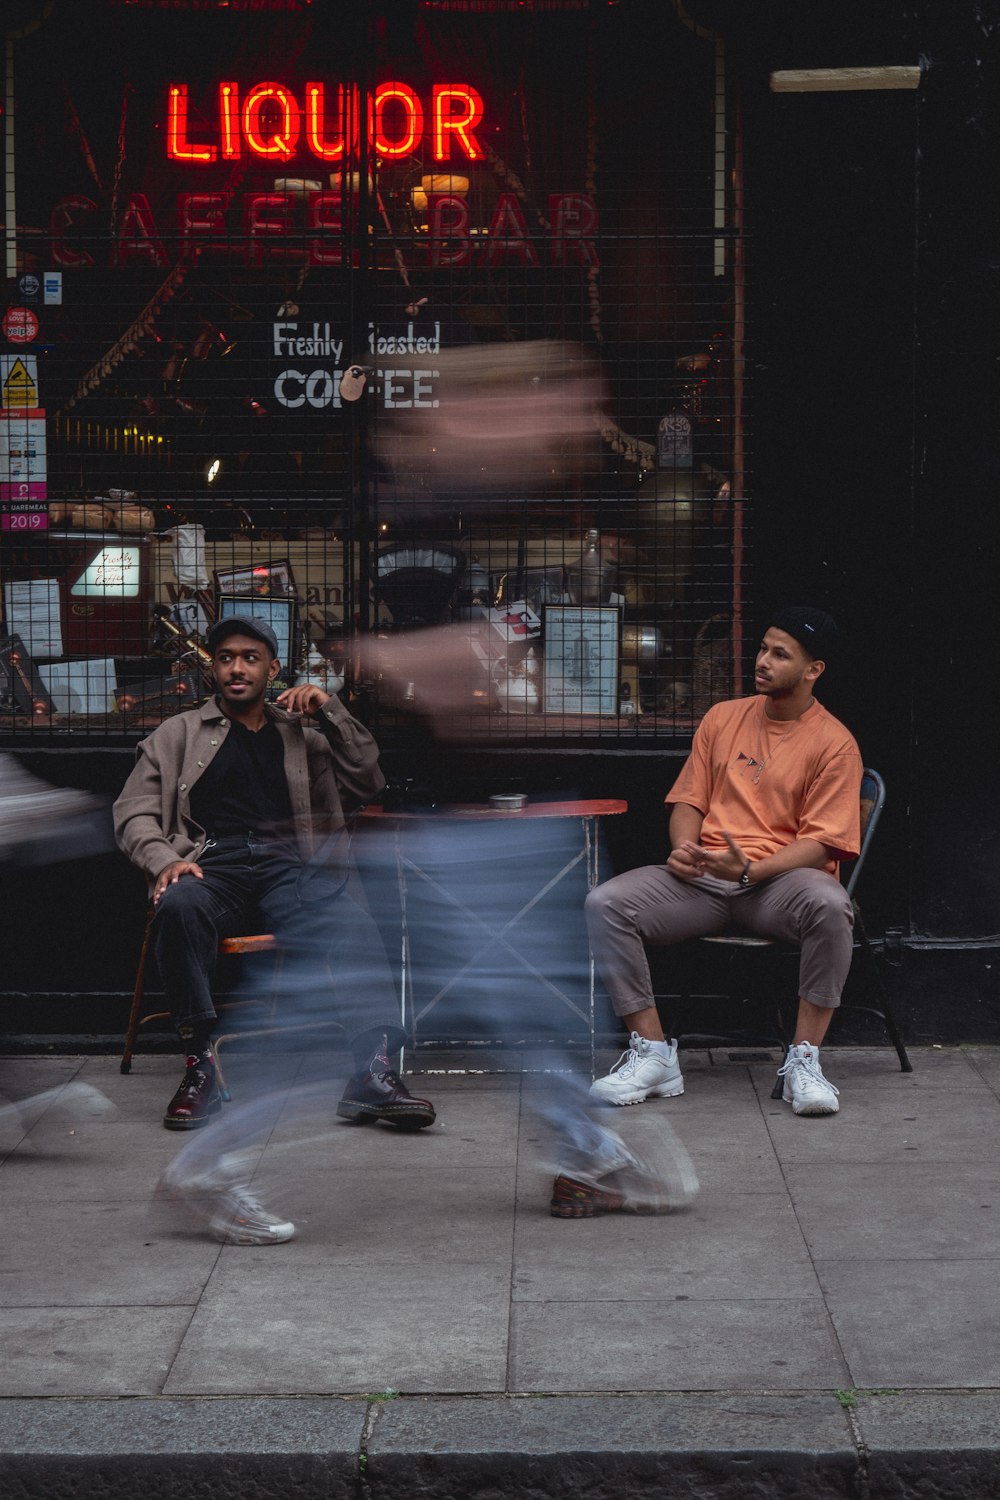 two men sitting on a bench in front of a liquor store